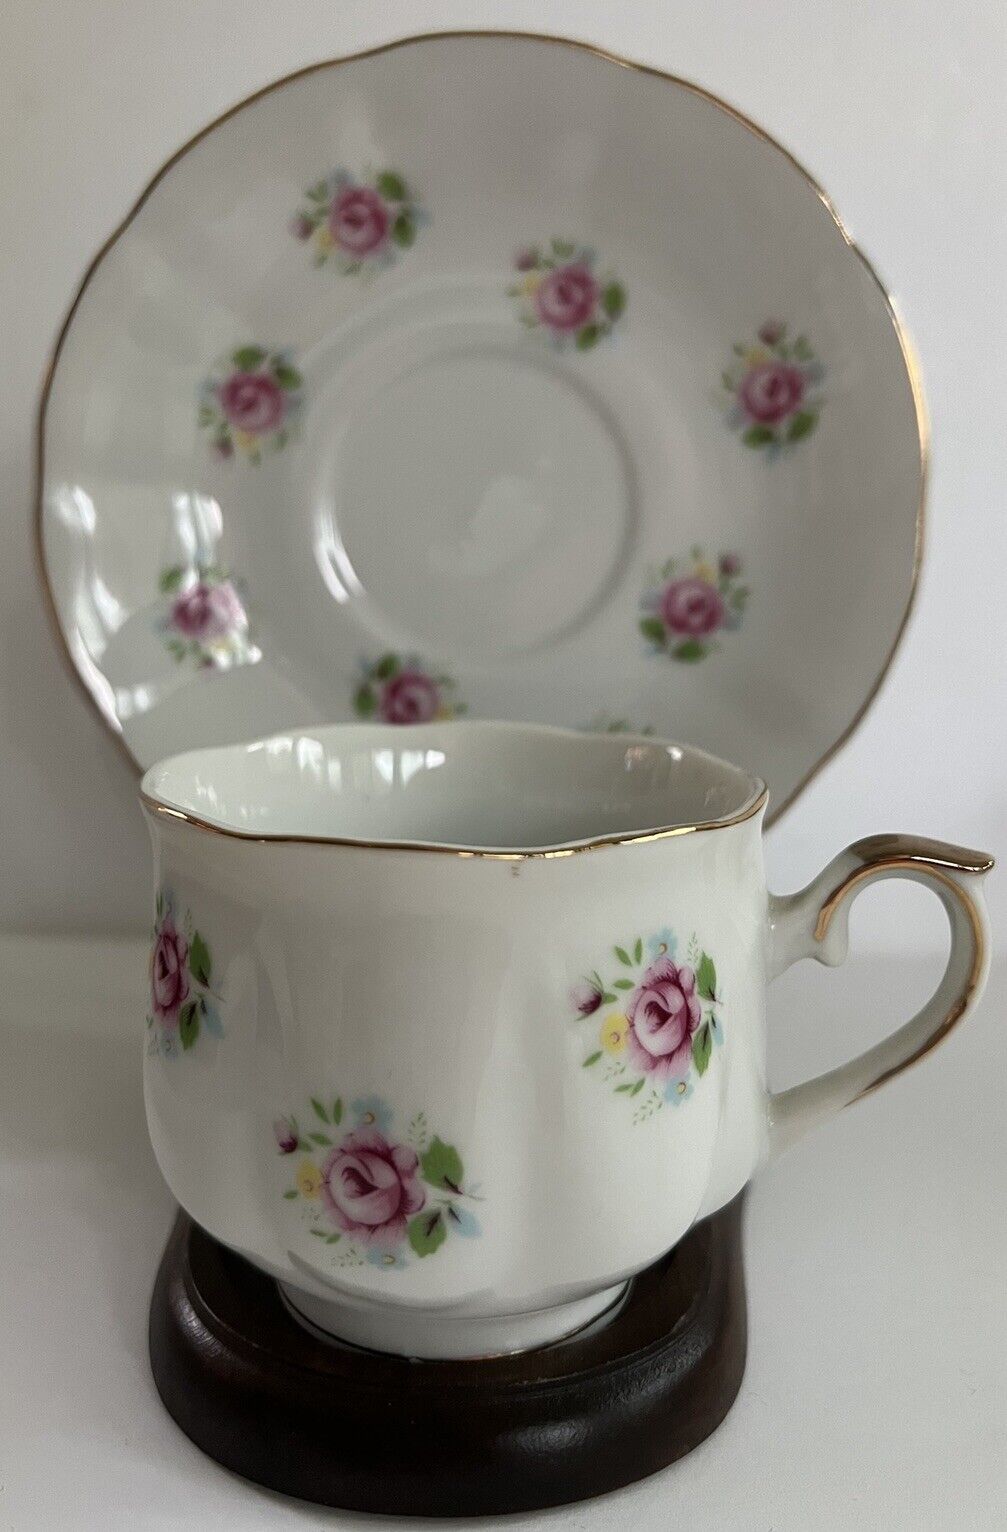 EXTRA TOUCH  BY FTD TEA CUP AND SAUCER - MADE IN JAPAN - SMALL PINK ROSES DECOR